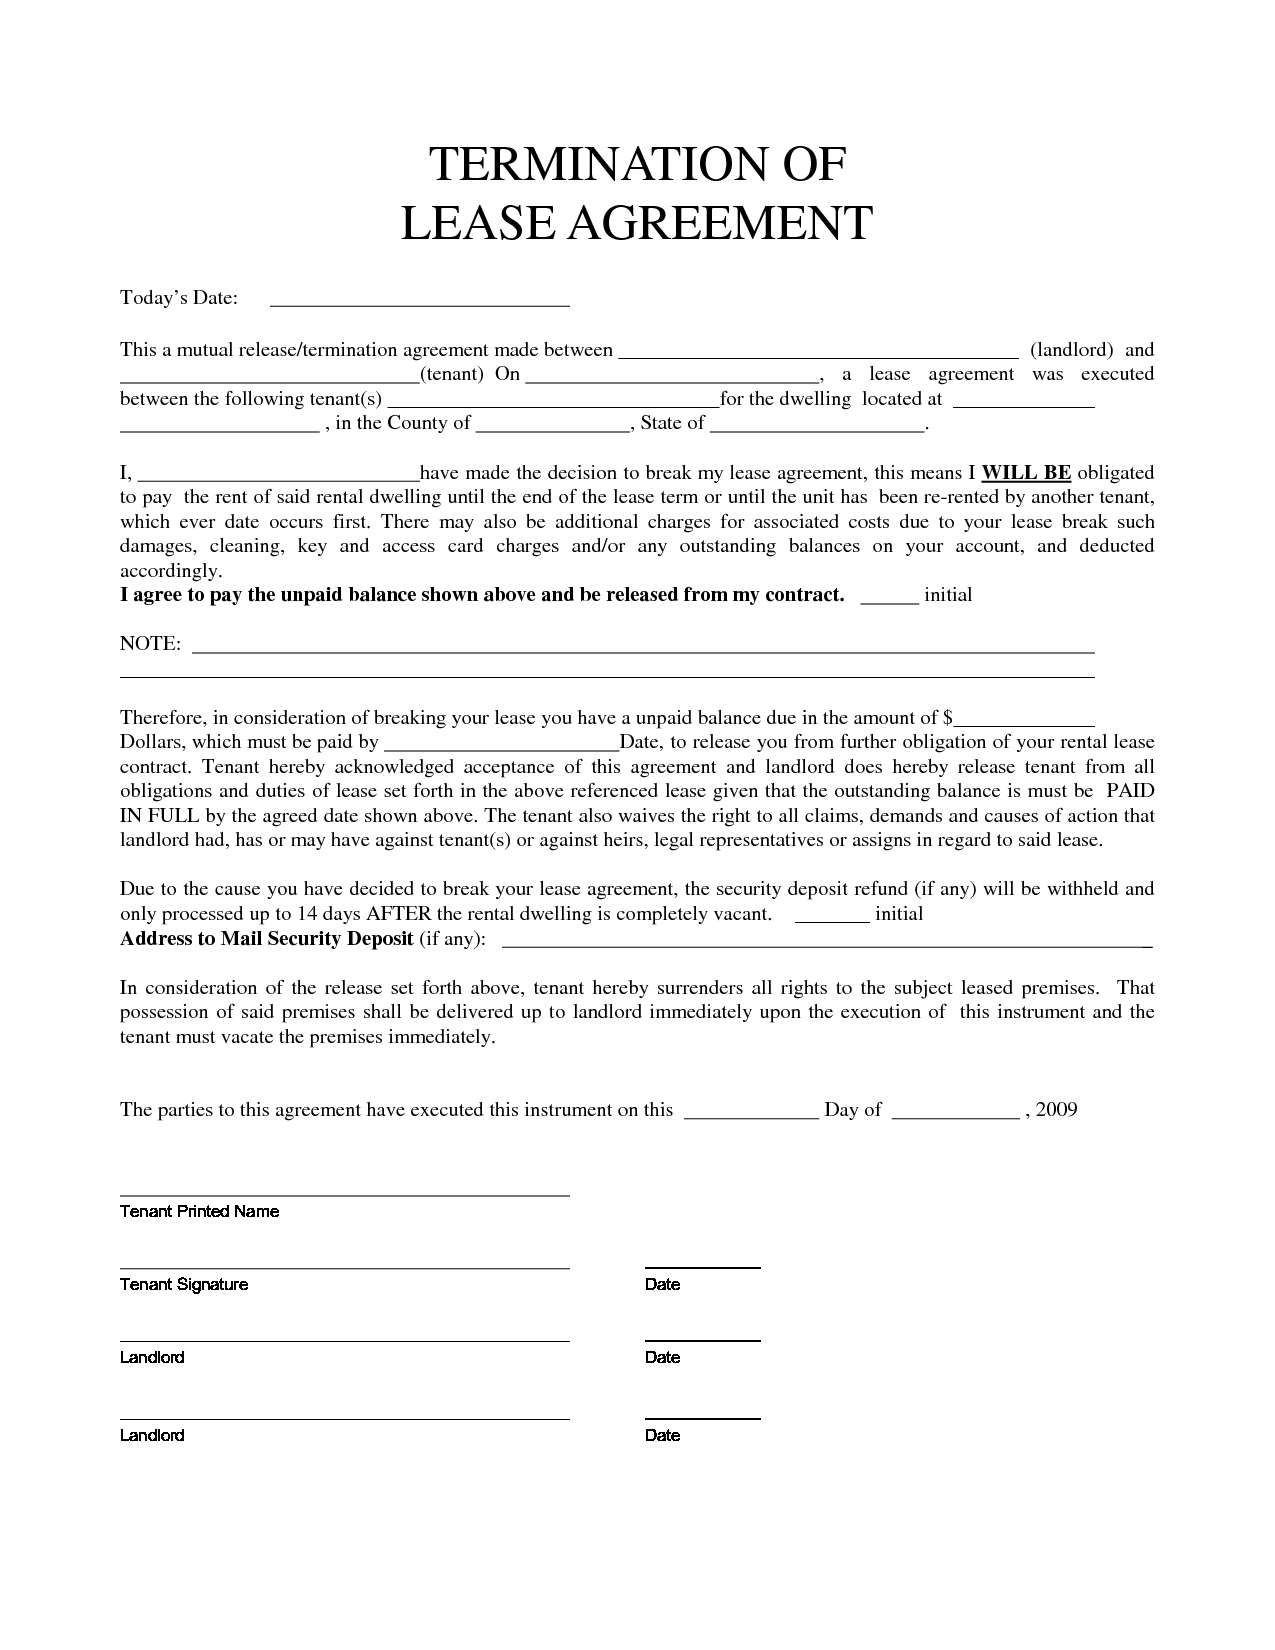 Termination Of Lease Agreement Form - Free Printable Documents intended for Fascinating Rental Contract Cancellation Letter Template